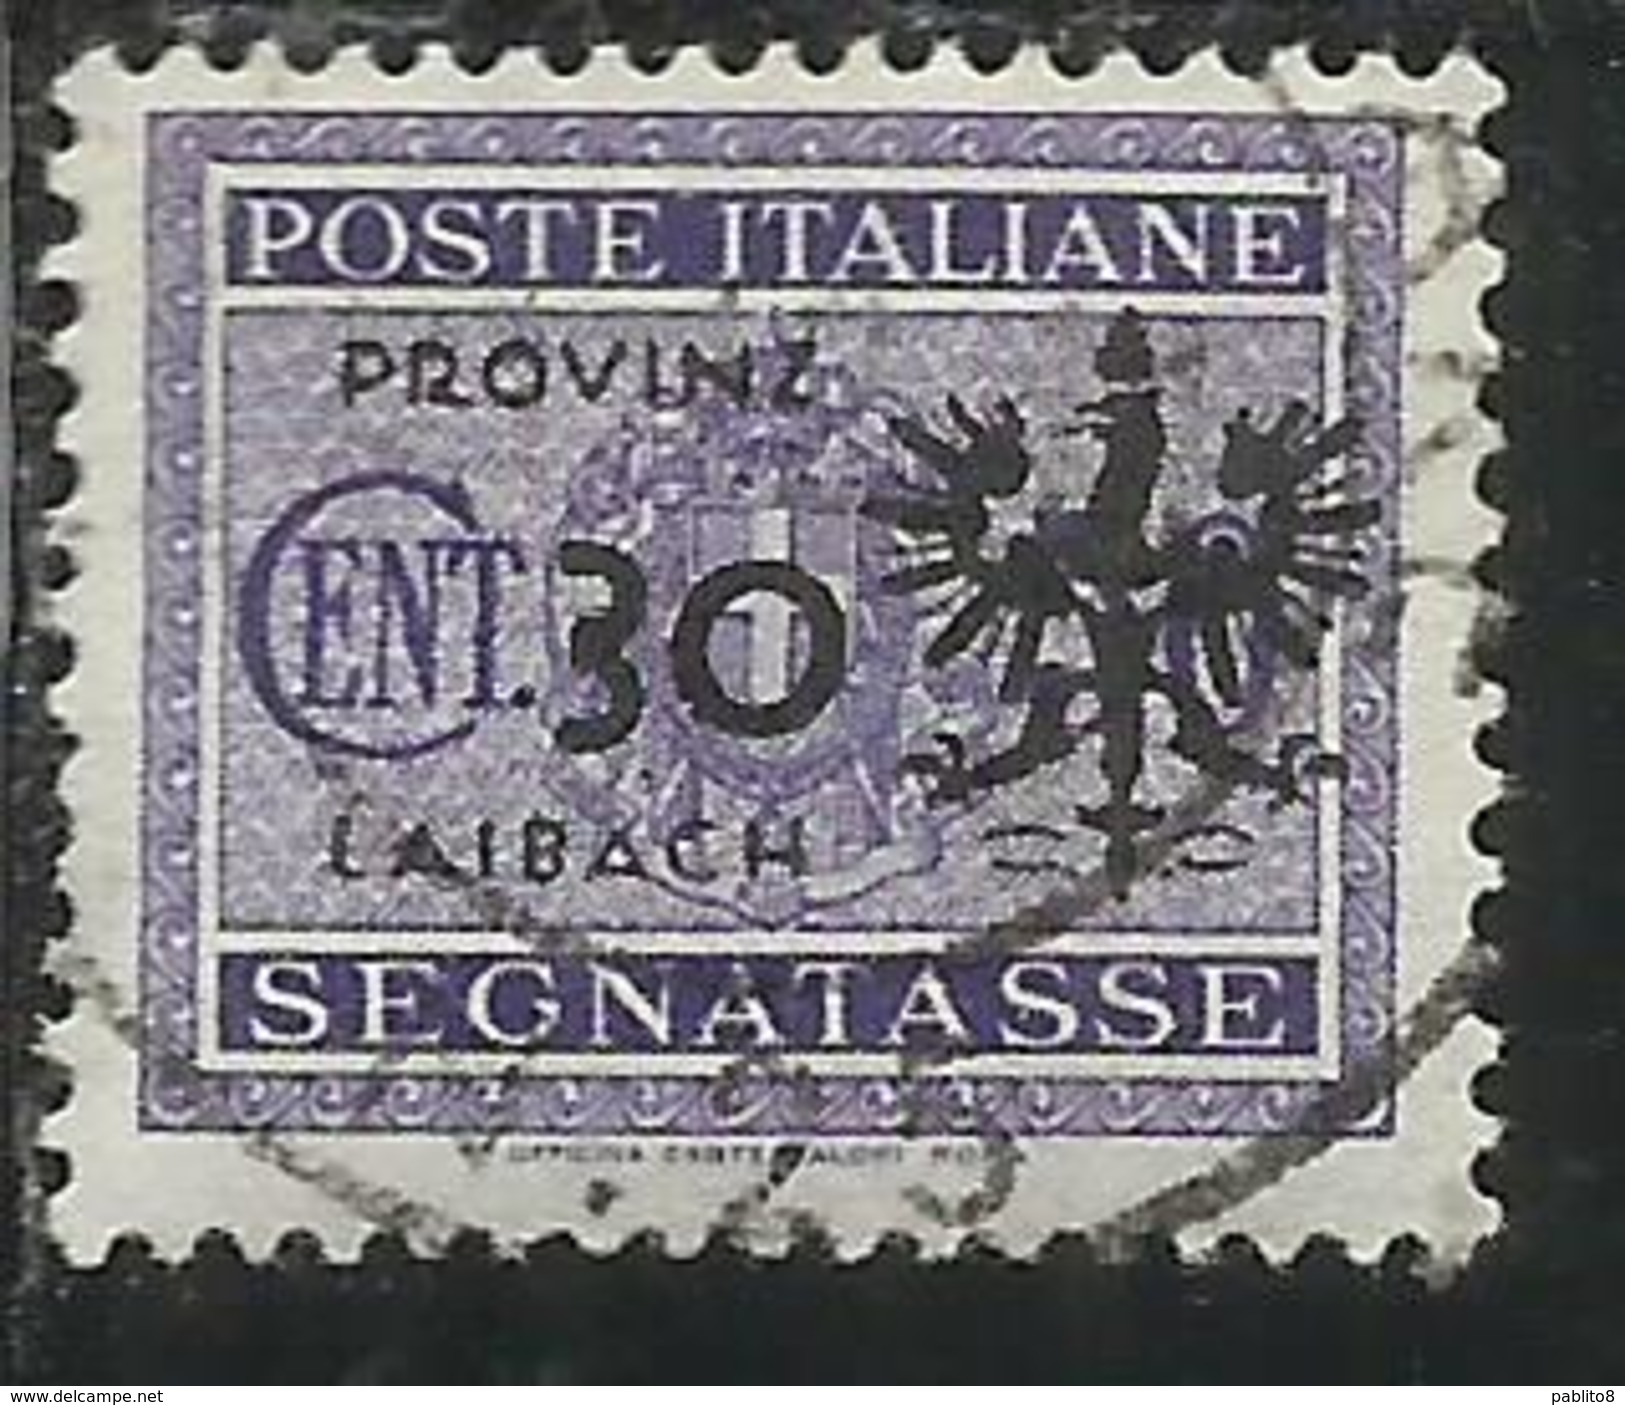 LUBIANA 1944 OCCUPAZIONE TEDESCA GERMAN OCCUPATION SEGNATASSE POSTAGE DUE TASSE TAXE CENT. 30 C USATO USED OBLITERE' - German Occ.: Lubiana